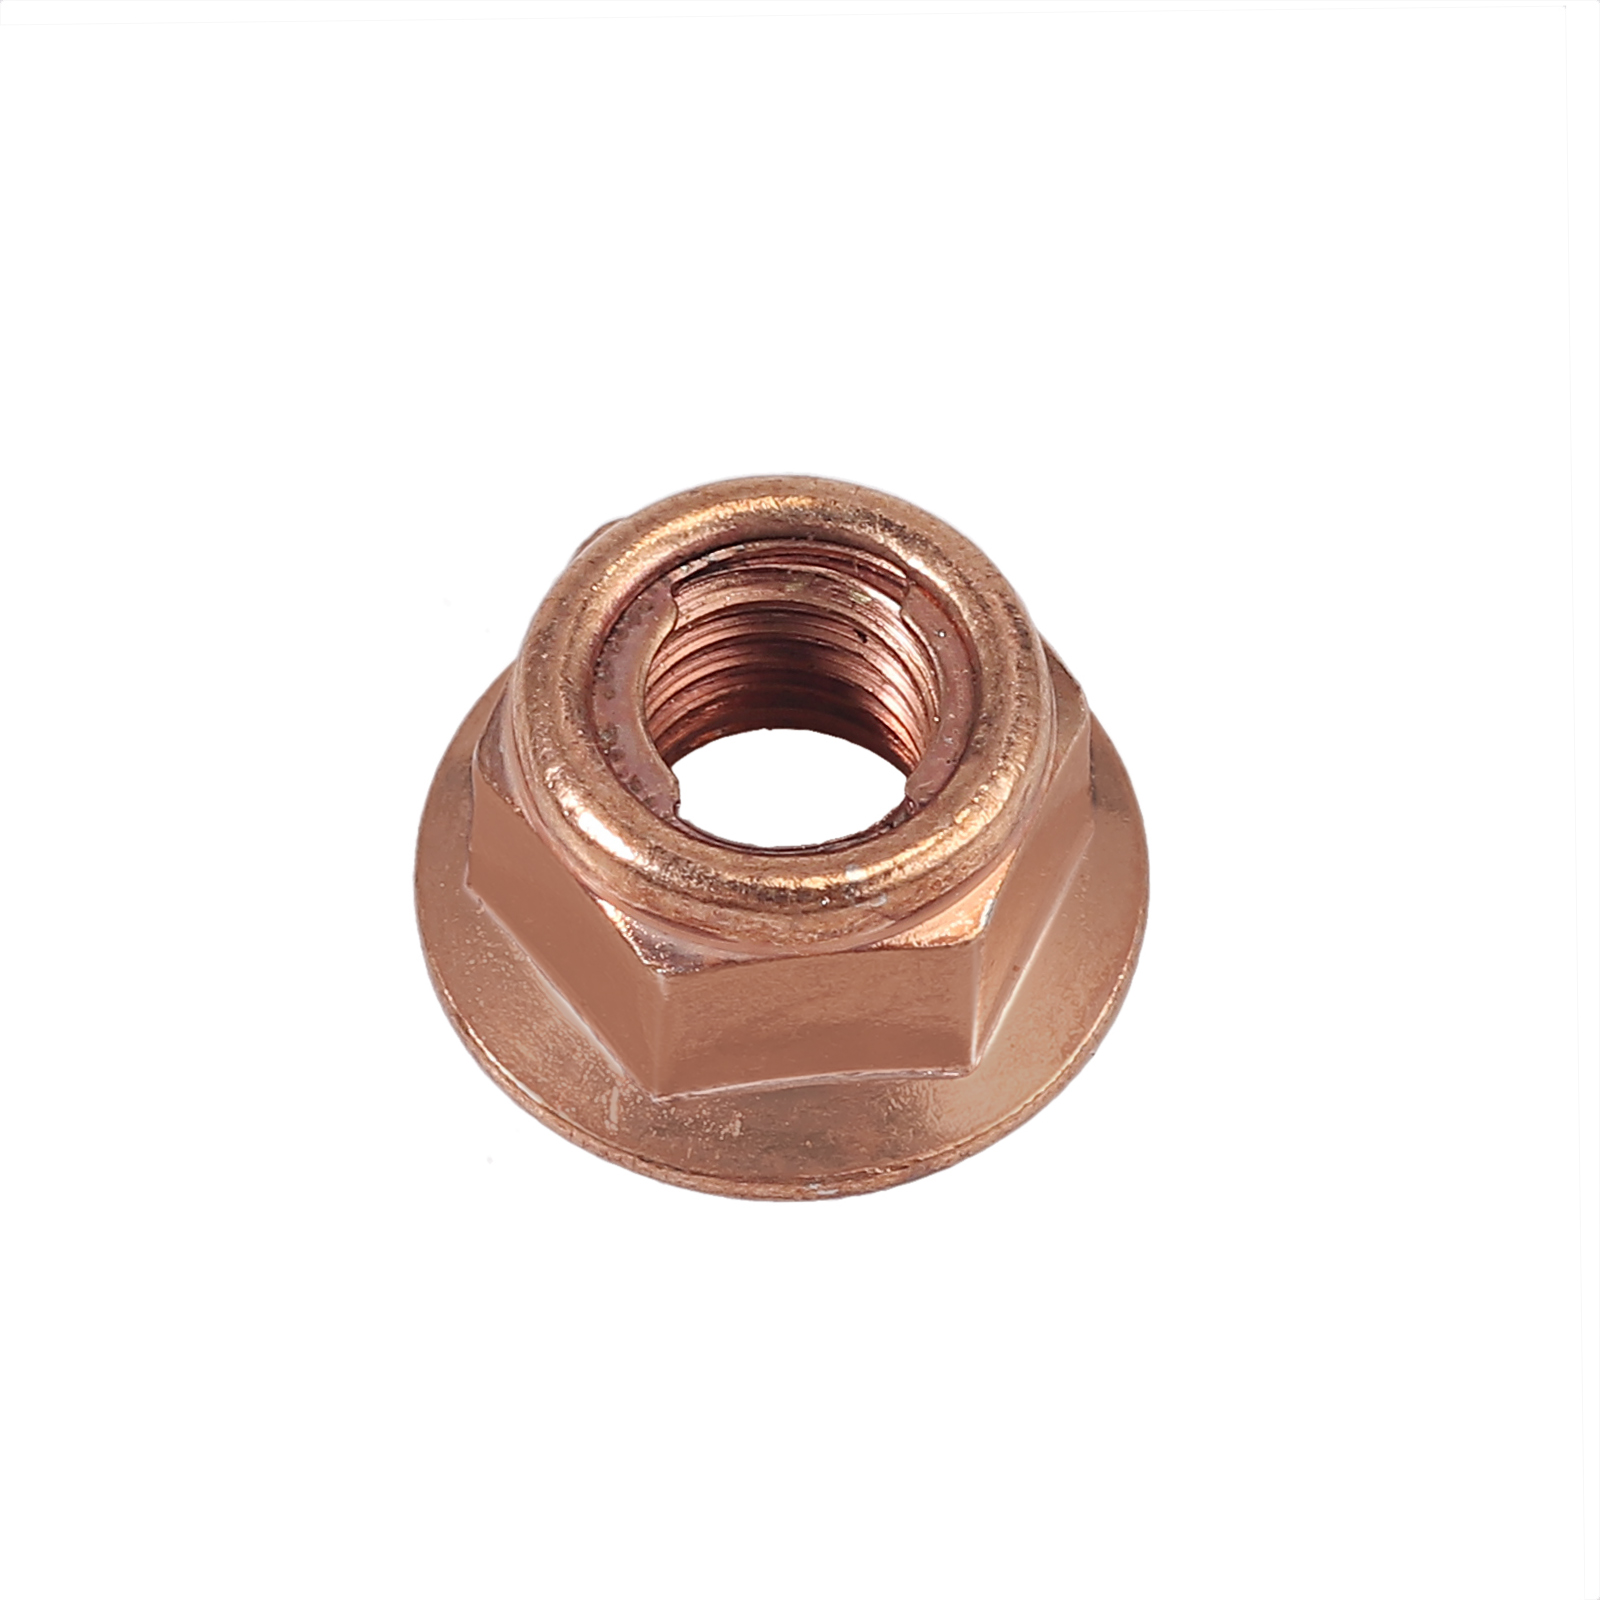 50X M8 COPPER FLASHED EXHAUST MANIFOLD NUT 8MM NUTS HIGH TEMPERATURE